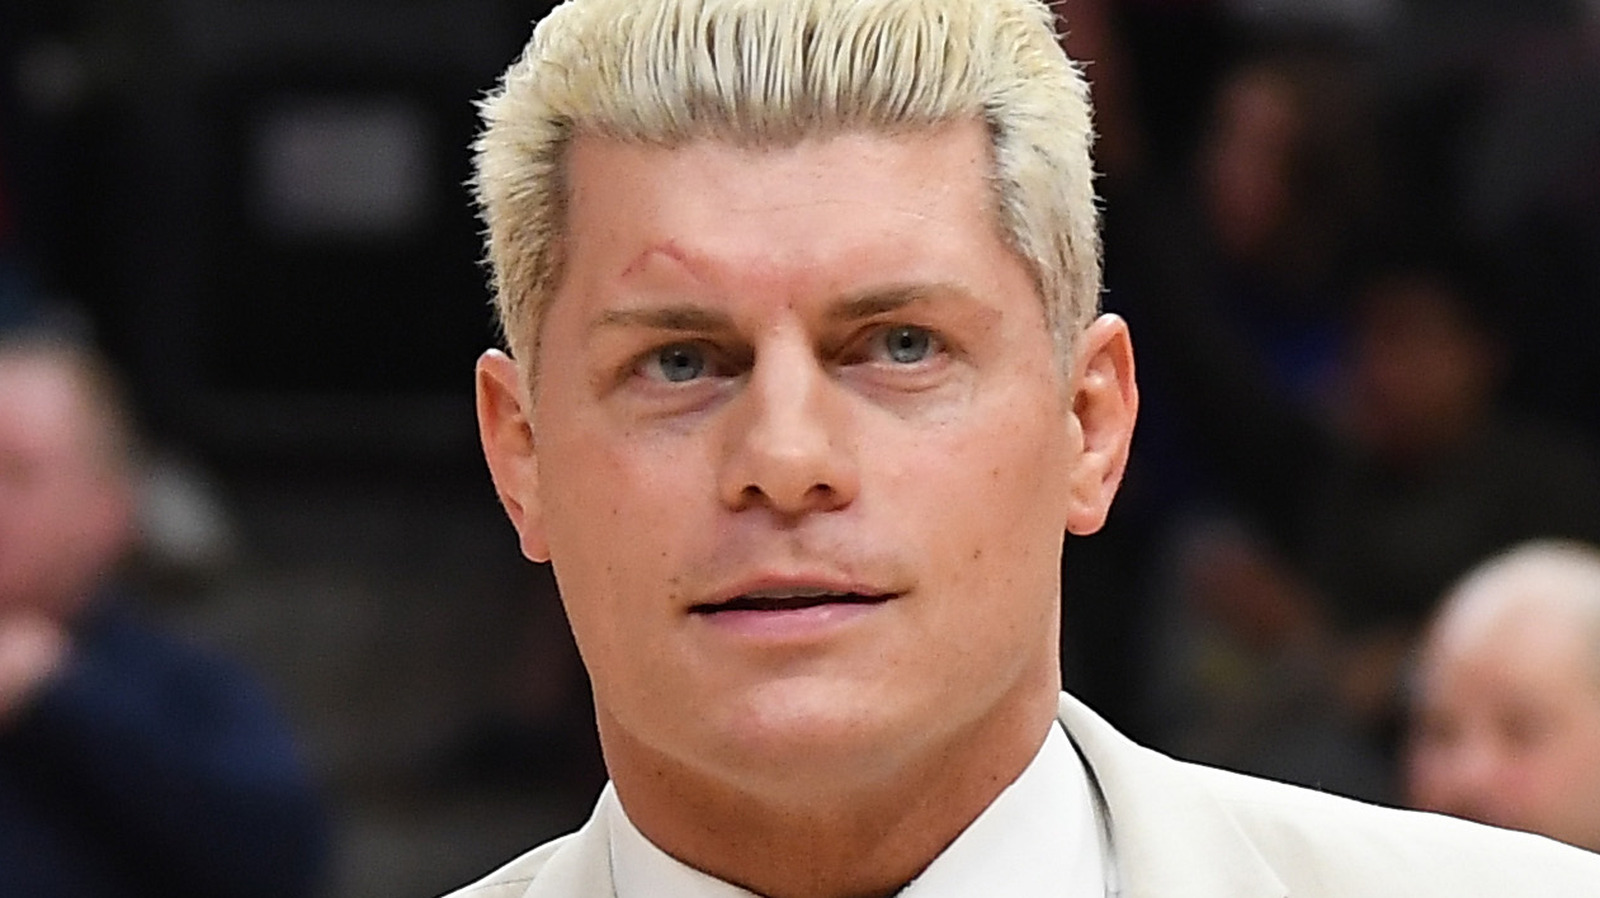 It was reported that WWE intervened in a vocal reaction to the Cody Rhodes/Brock Lesnar clip on Raw